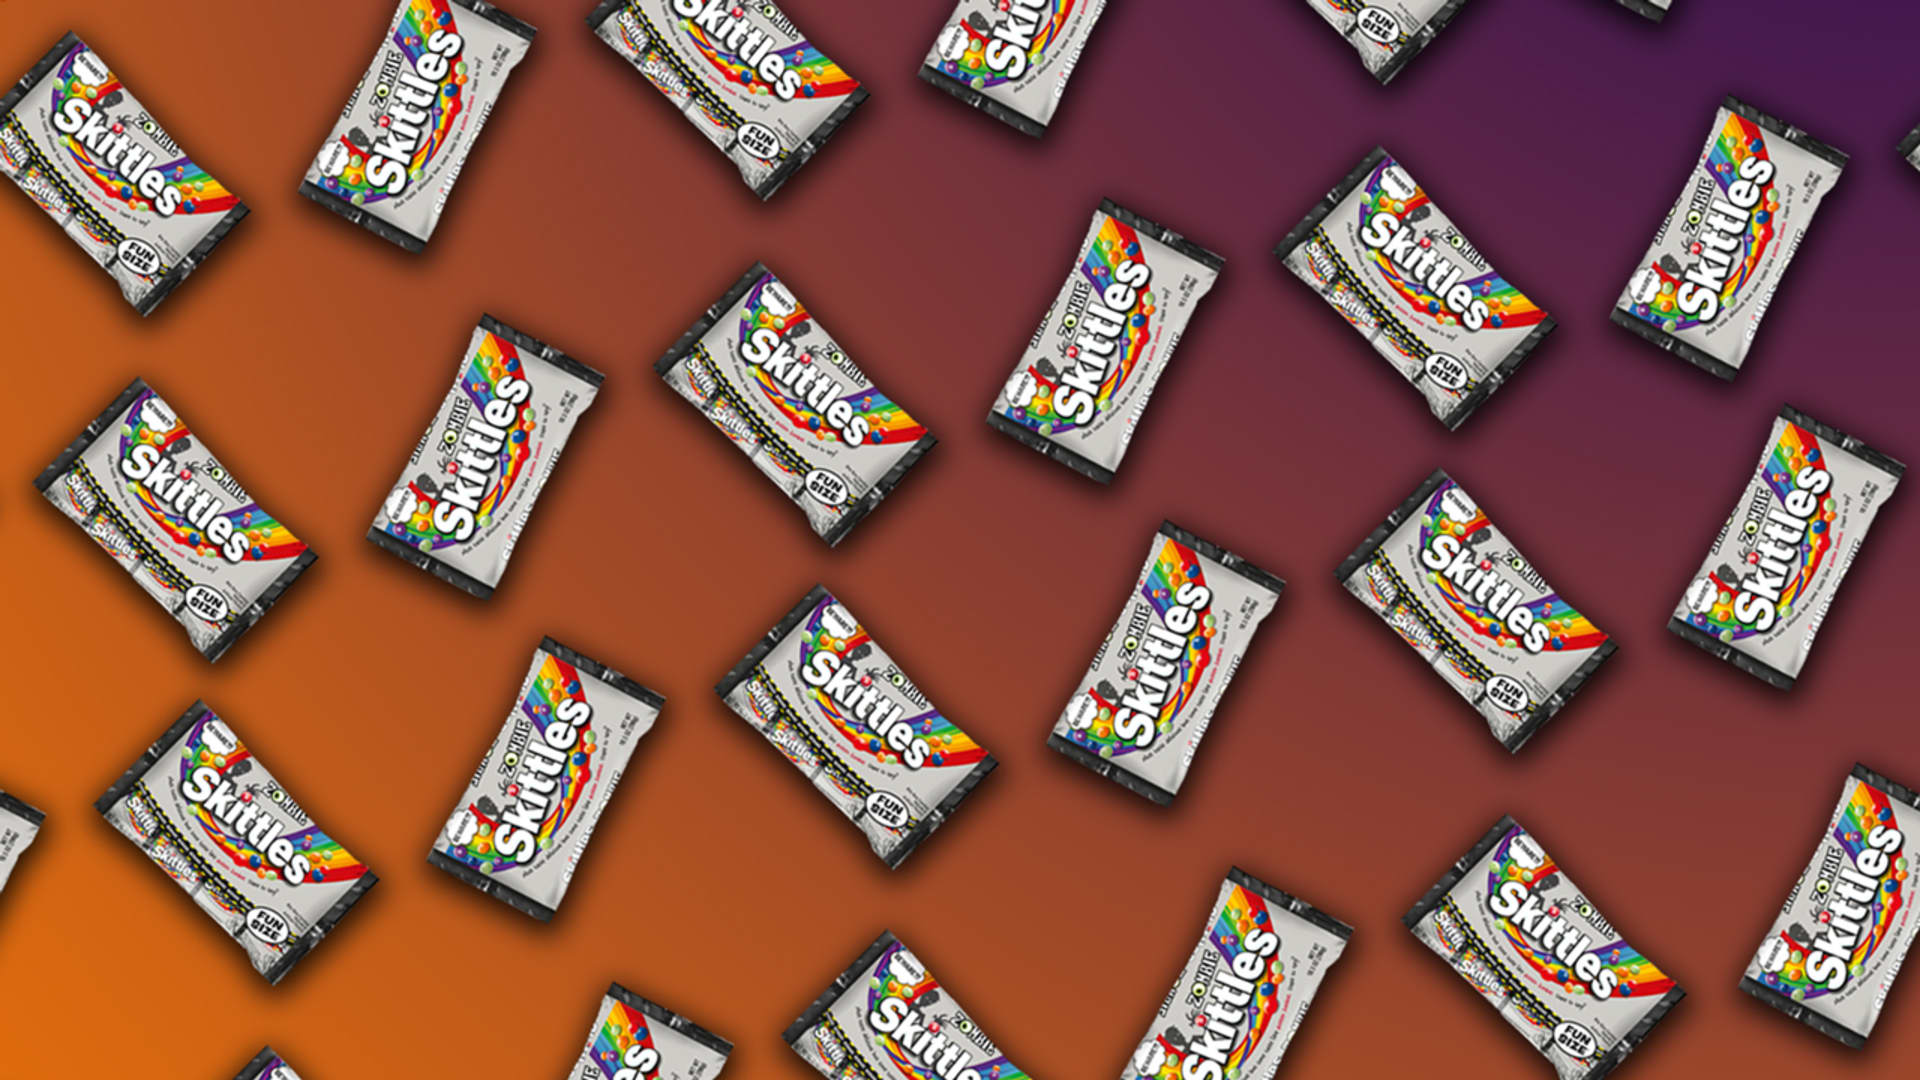 If you plan to eat Skittles in 2019, be careful